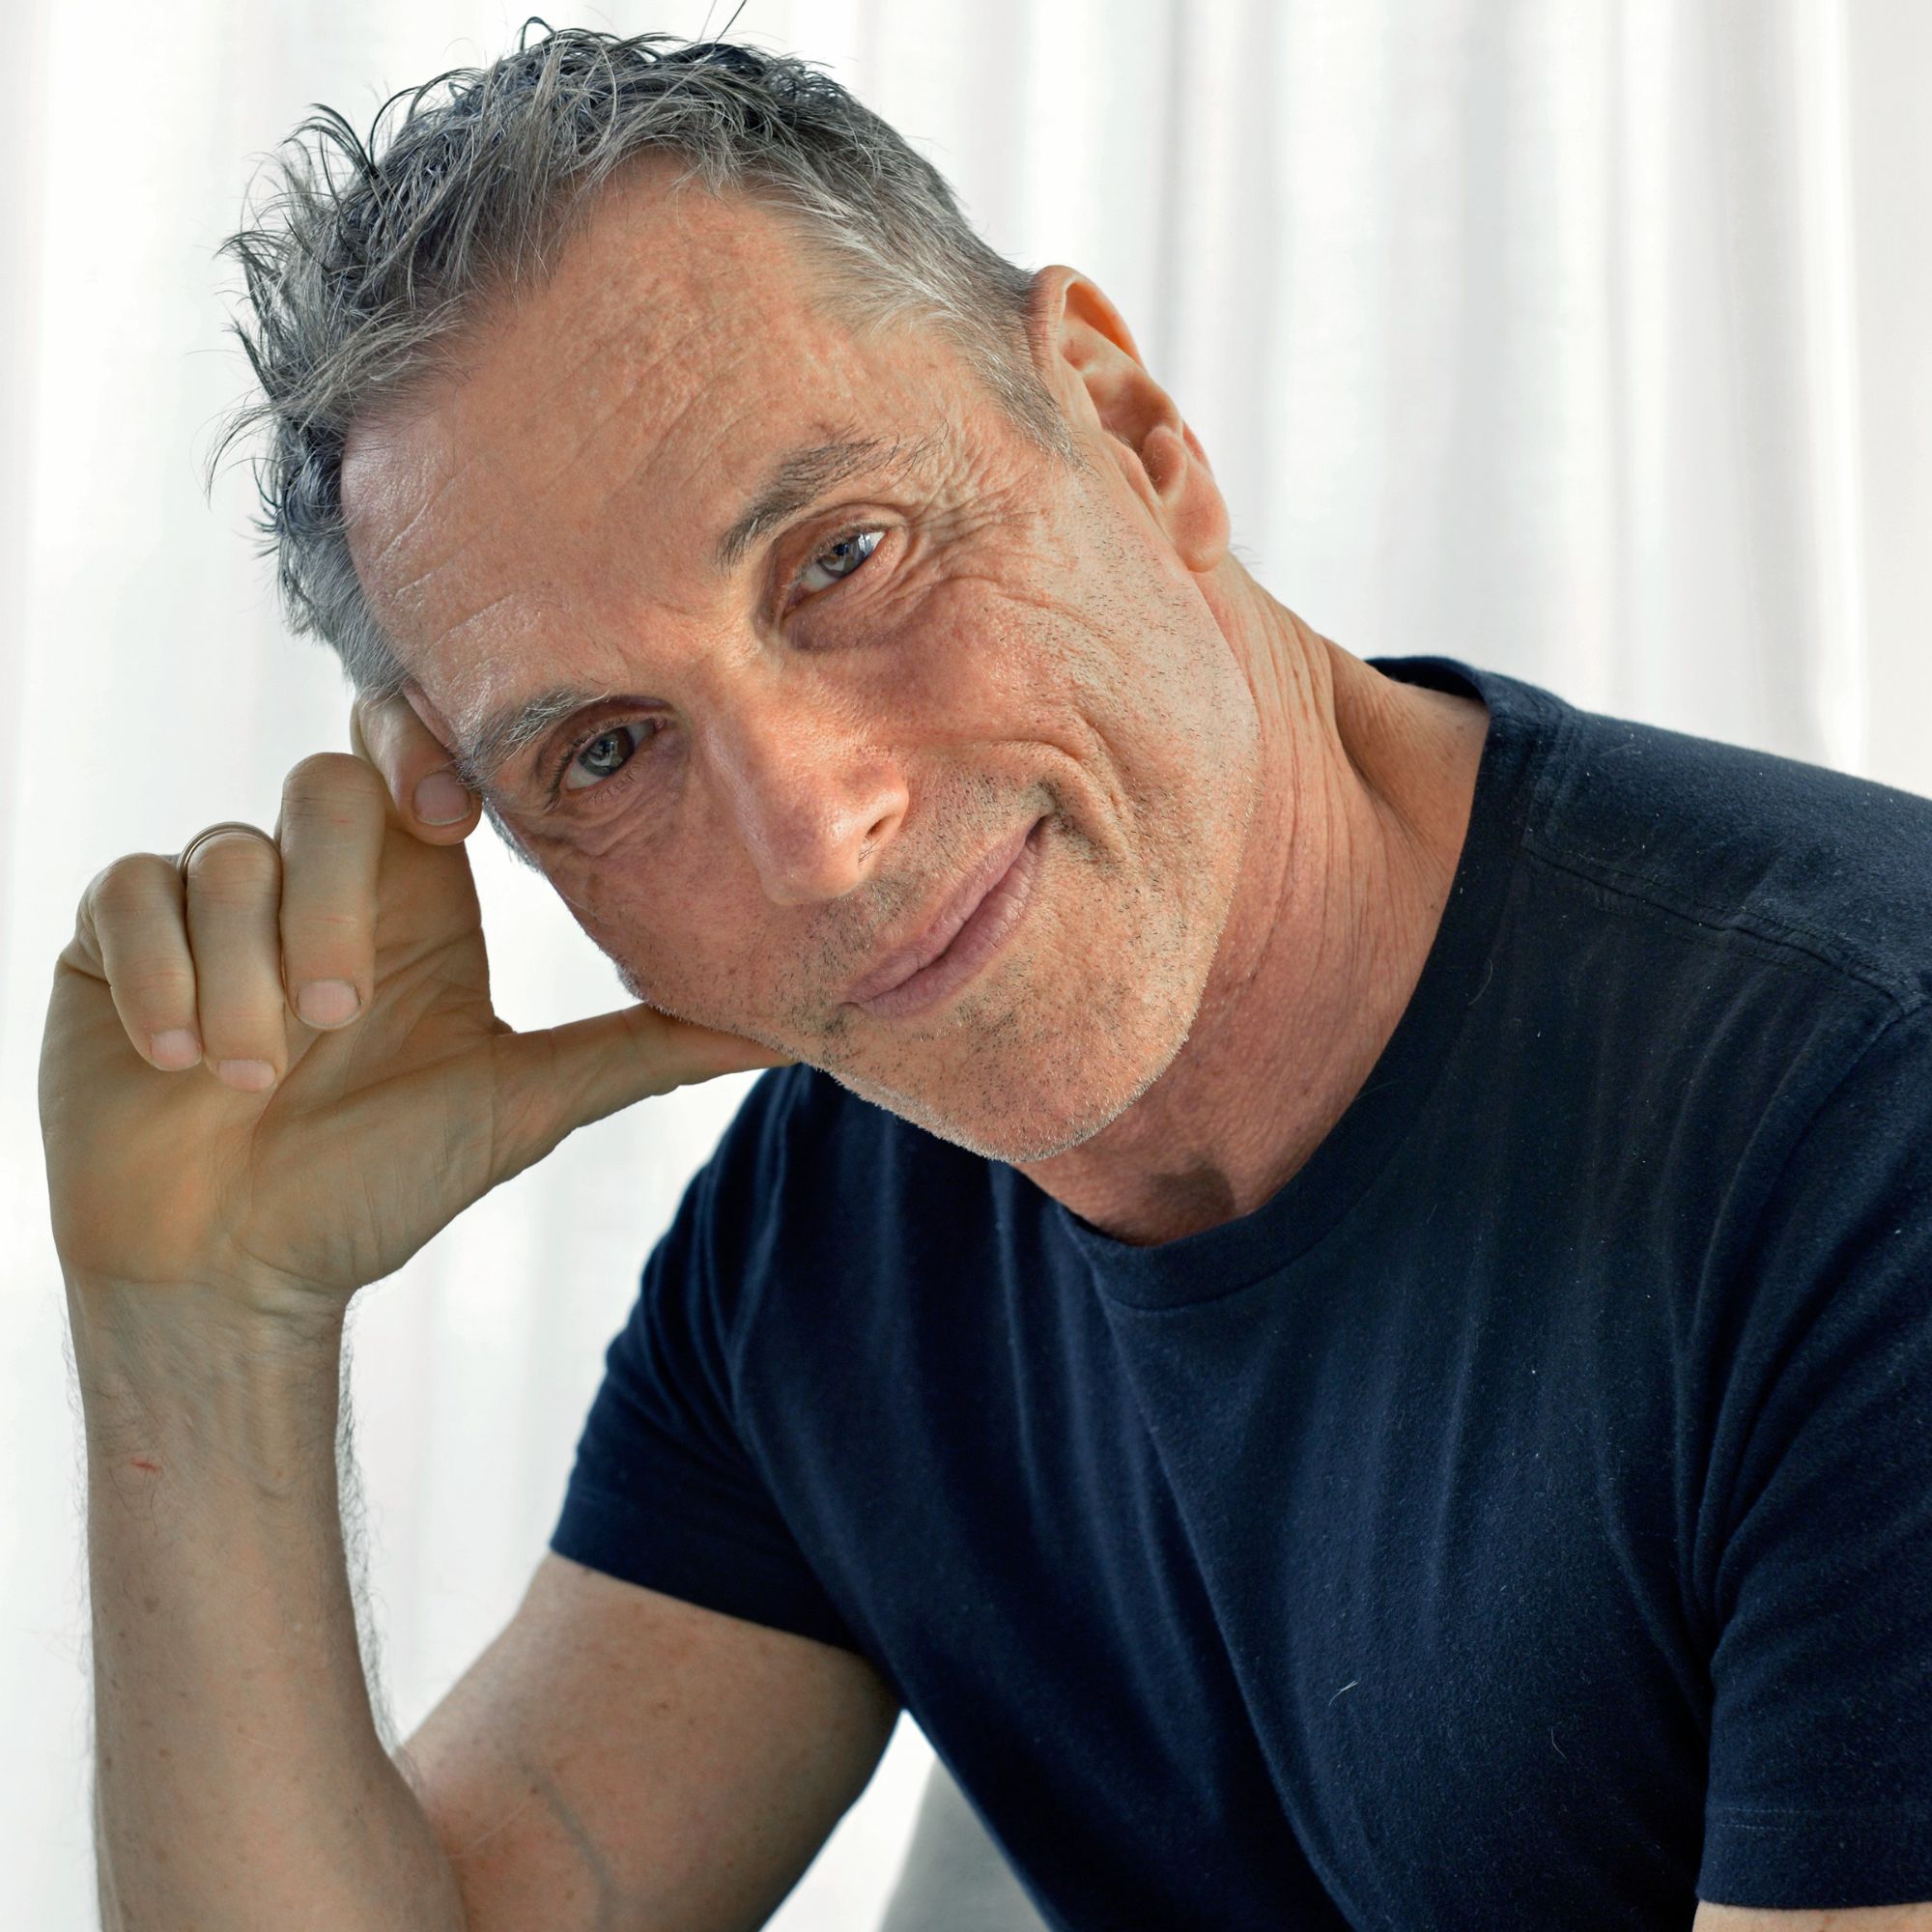 A picture of Vicente Wolf, a man leaning forwards wearing a navy blue t-shirt, with white curtains in the background